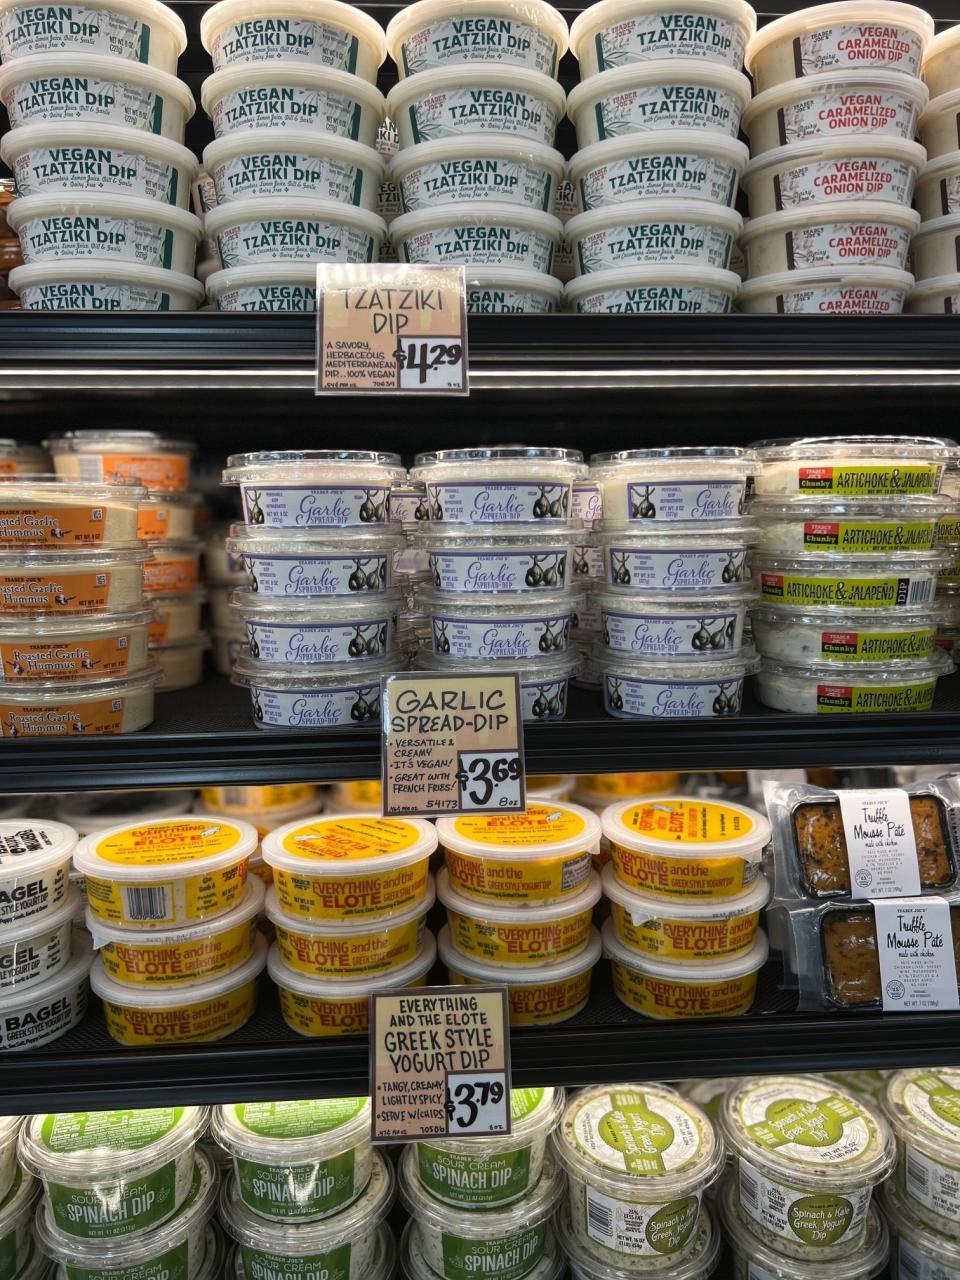 Shelves stocked with various dips and spreads, including tzatziki and garlic spread, with pricing labels